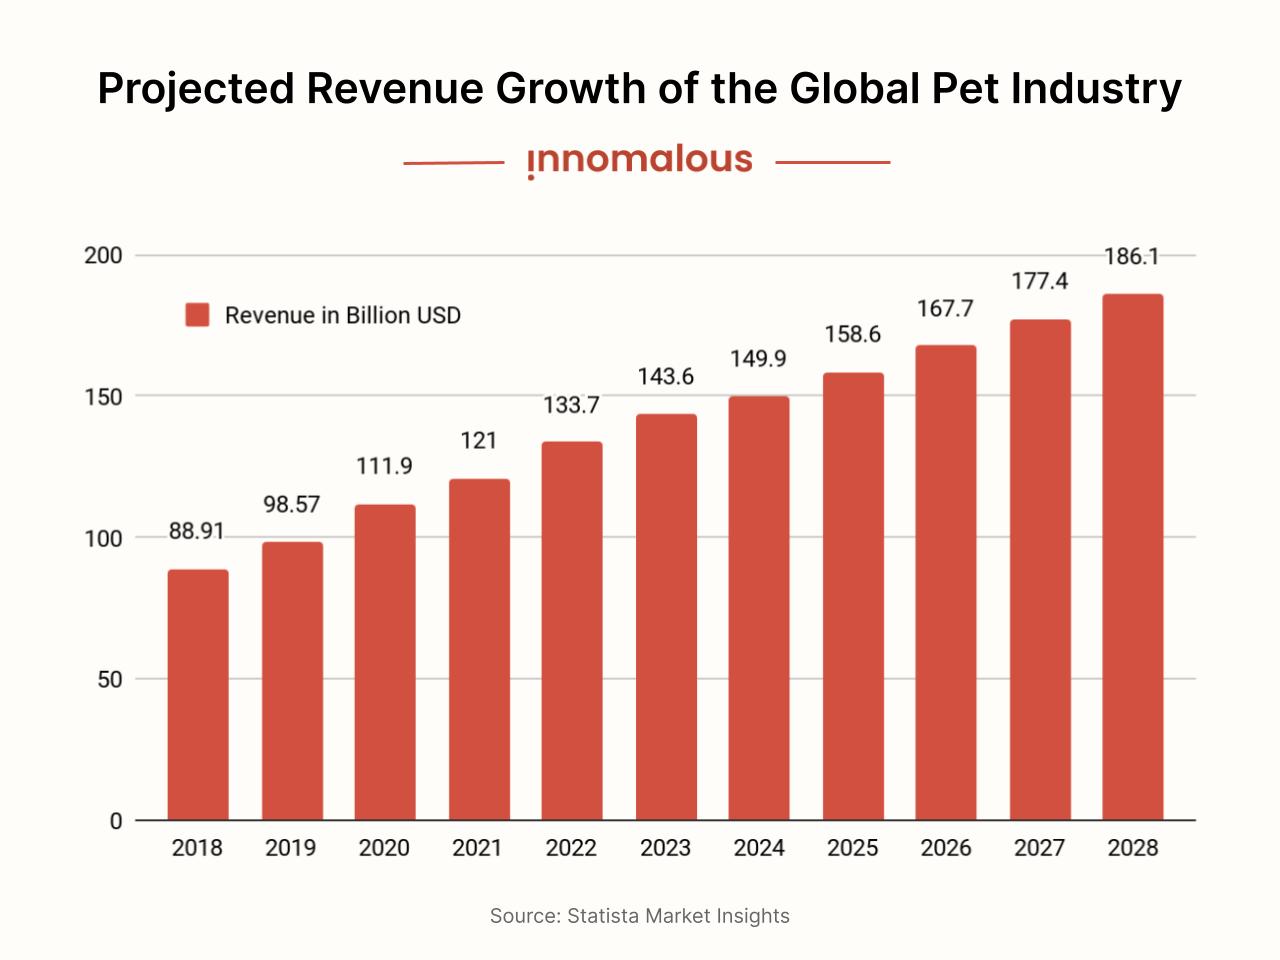 Innomalous Pet Food Manufacturer - How to Start or Scale a Pet Food Business in India - Pet Industry Growth Chart